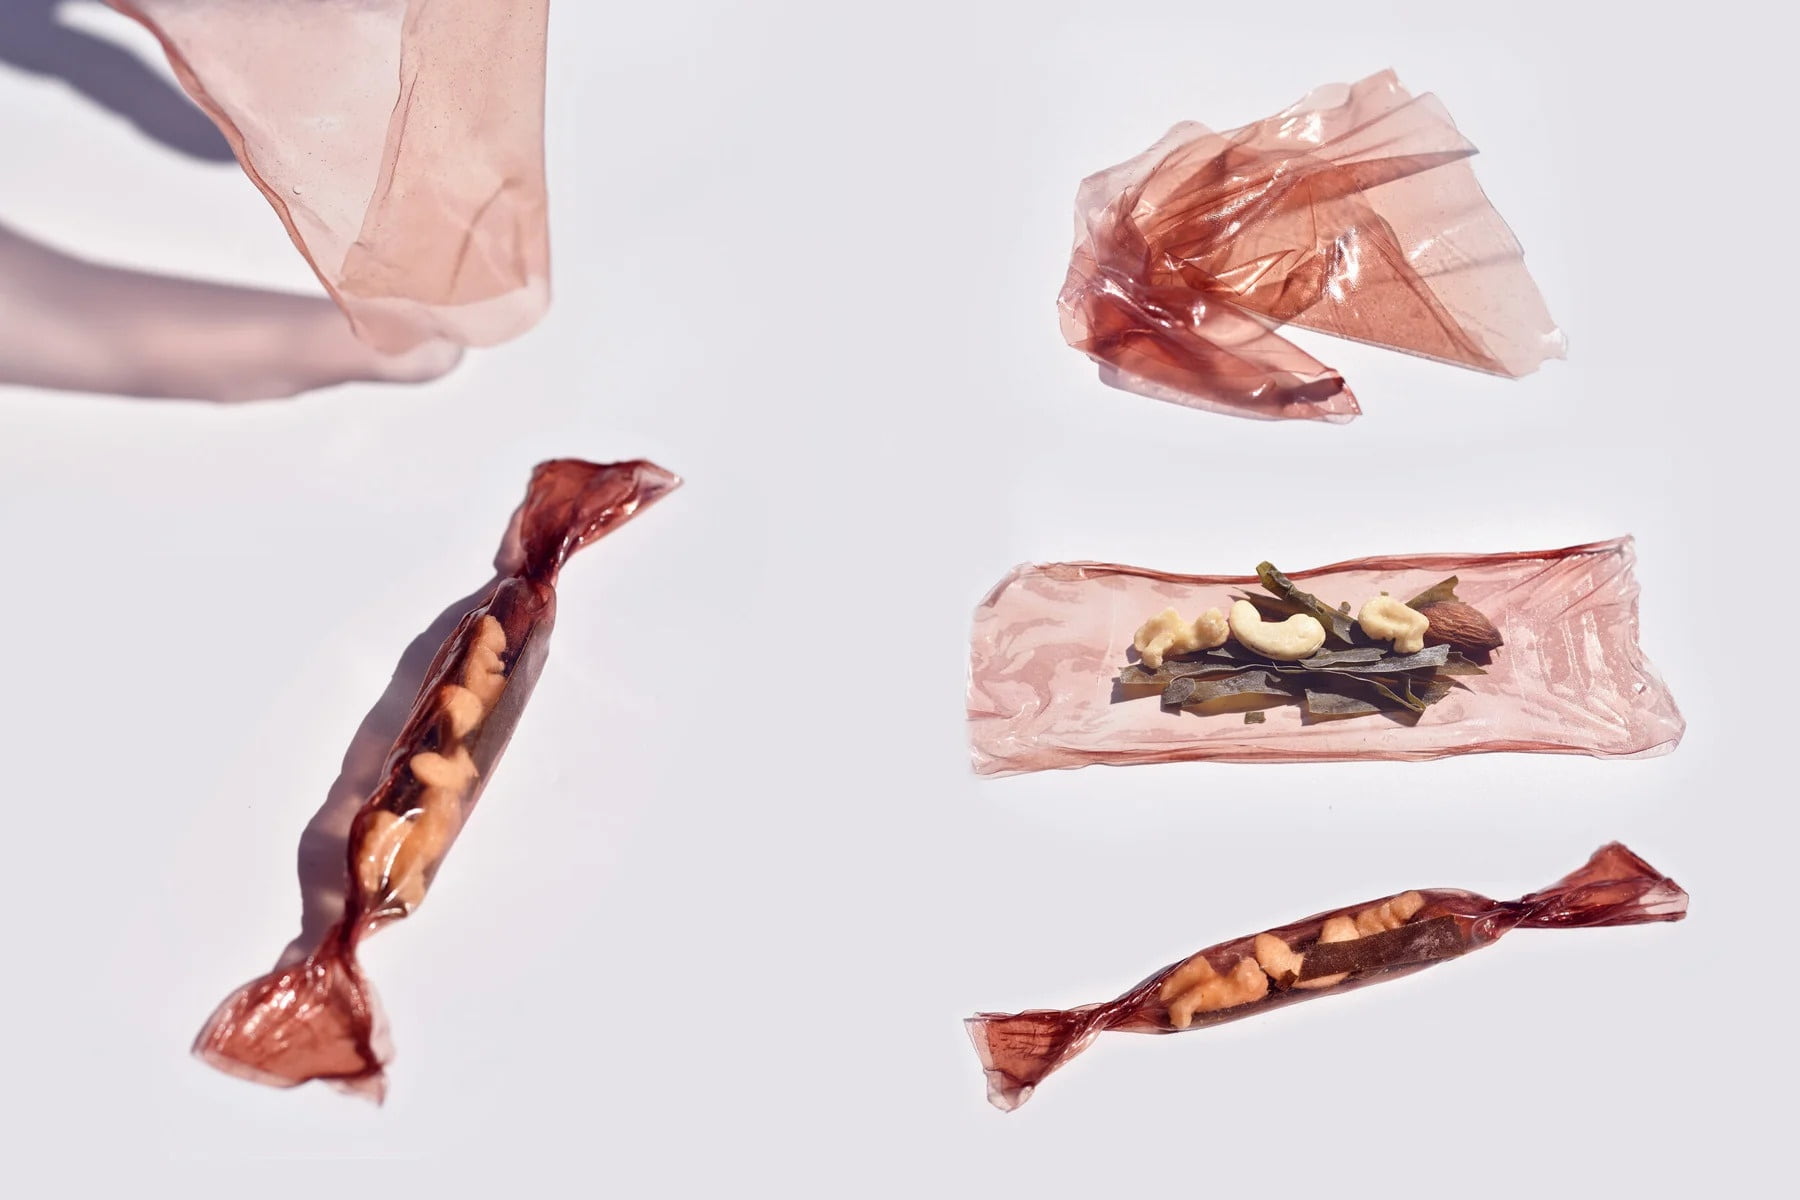 Nuts and snacks wrapped in edible wrappers.